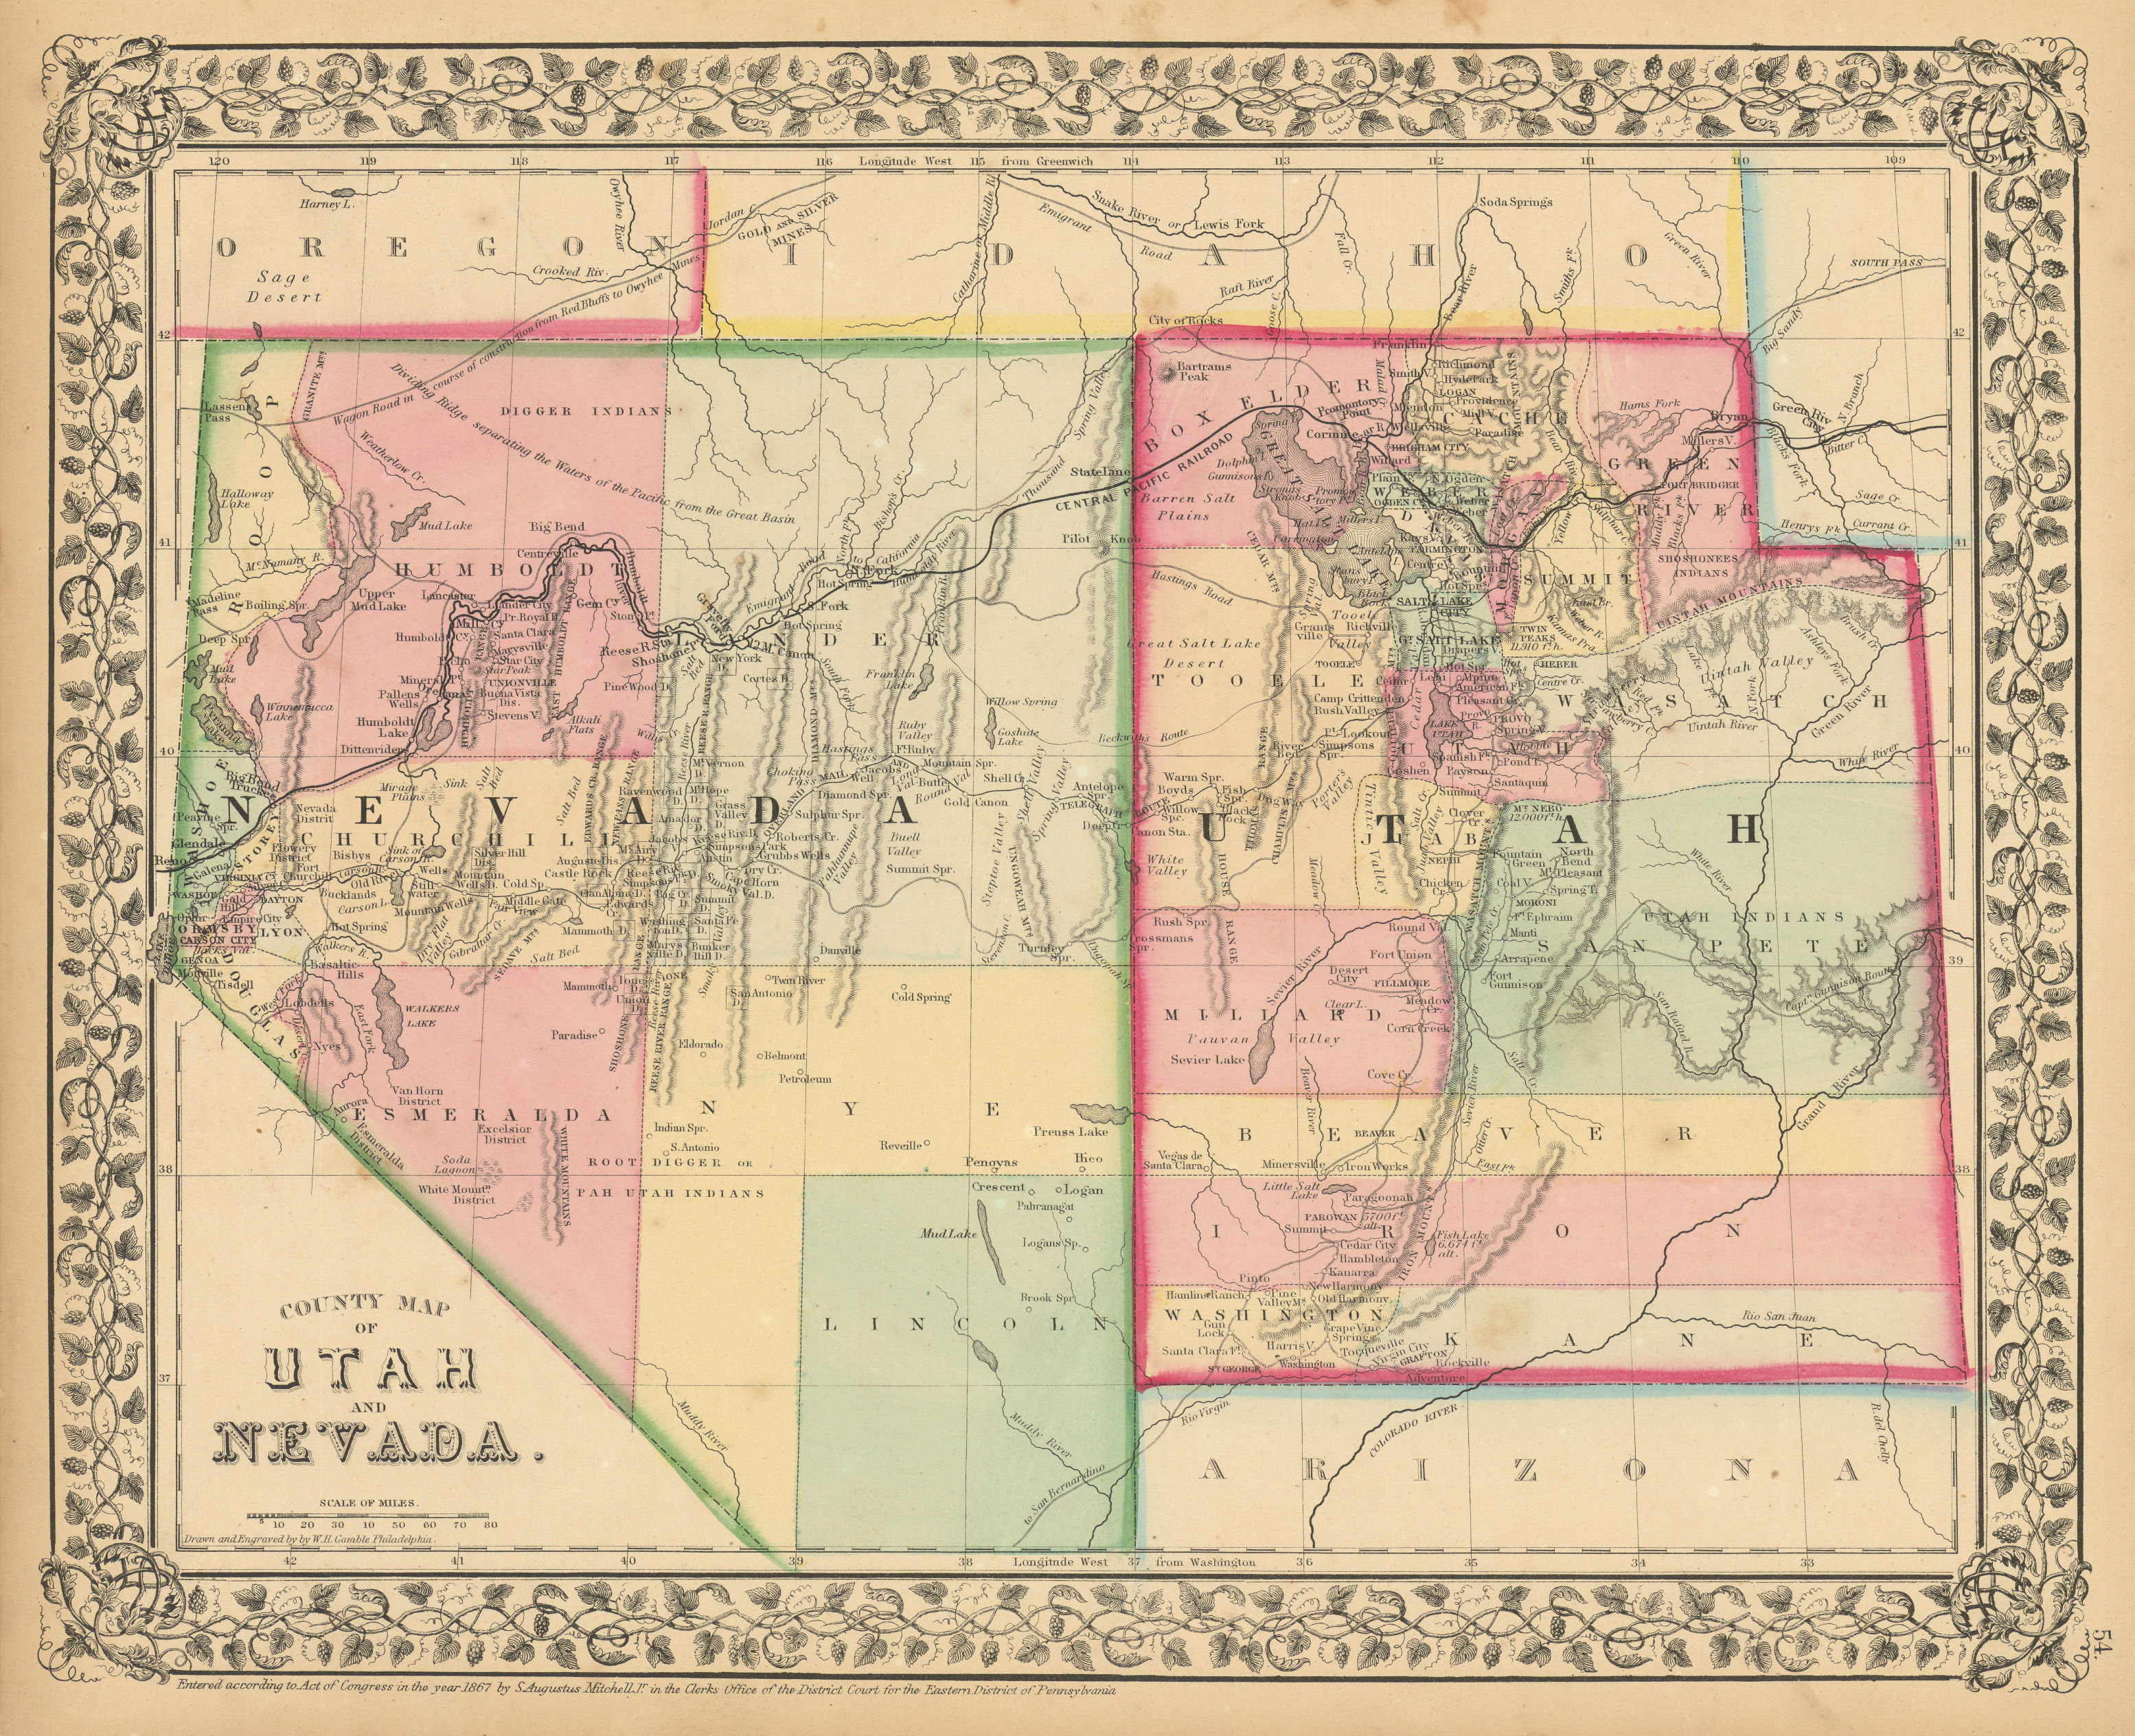 Associate Product County map of Utah and Nevada by Samuel Augustus Mitchell. State map 1869